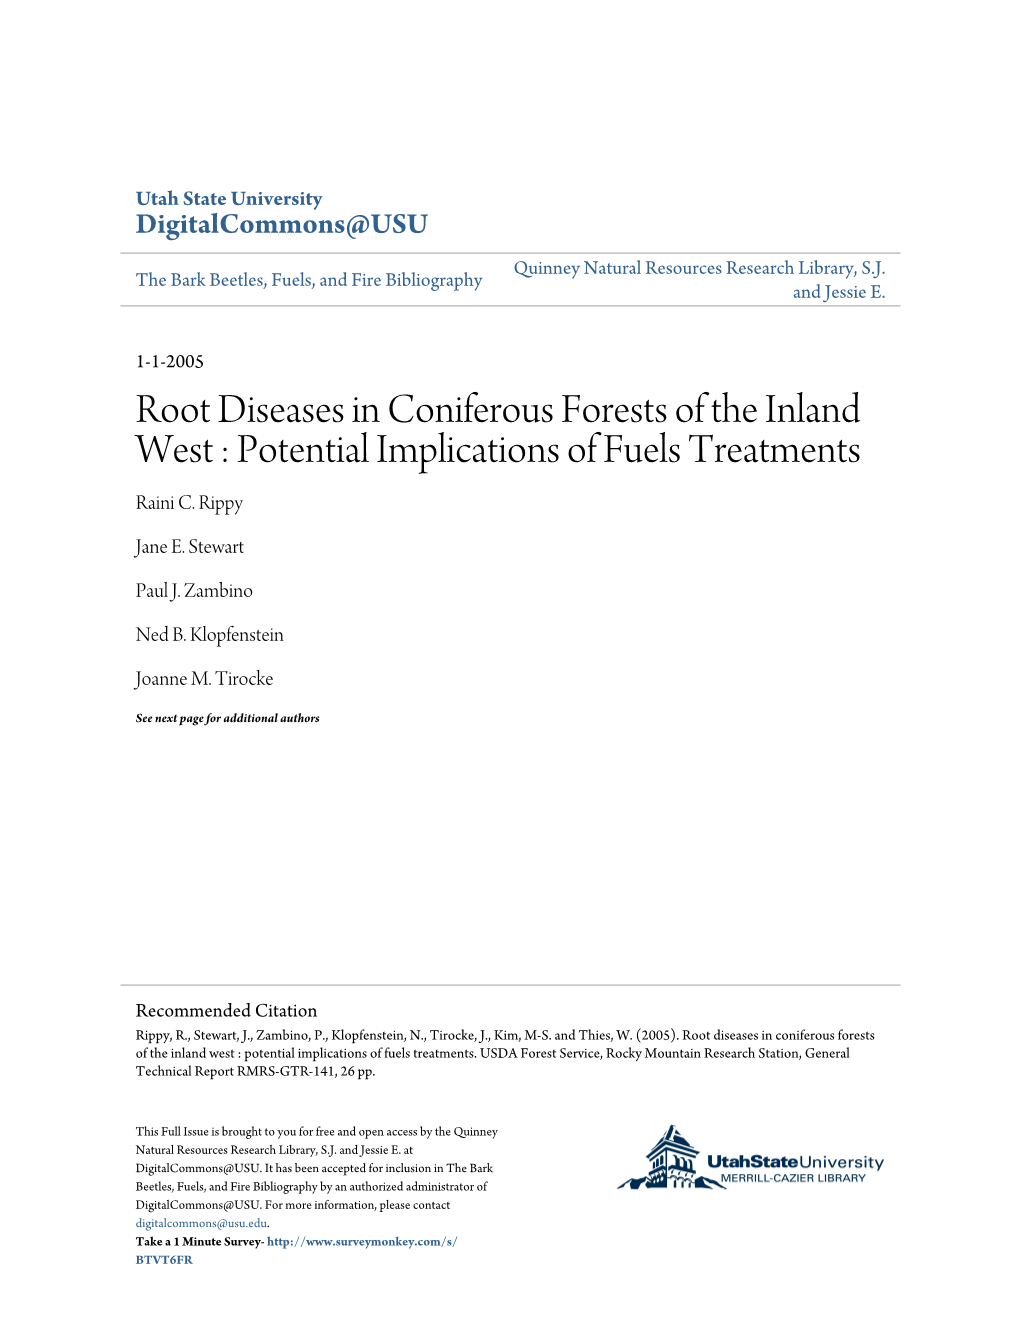 Root Diseases in Coniferous Forests of the Inland West : Potential Implications of Fuels Treatments Raini C